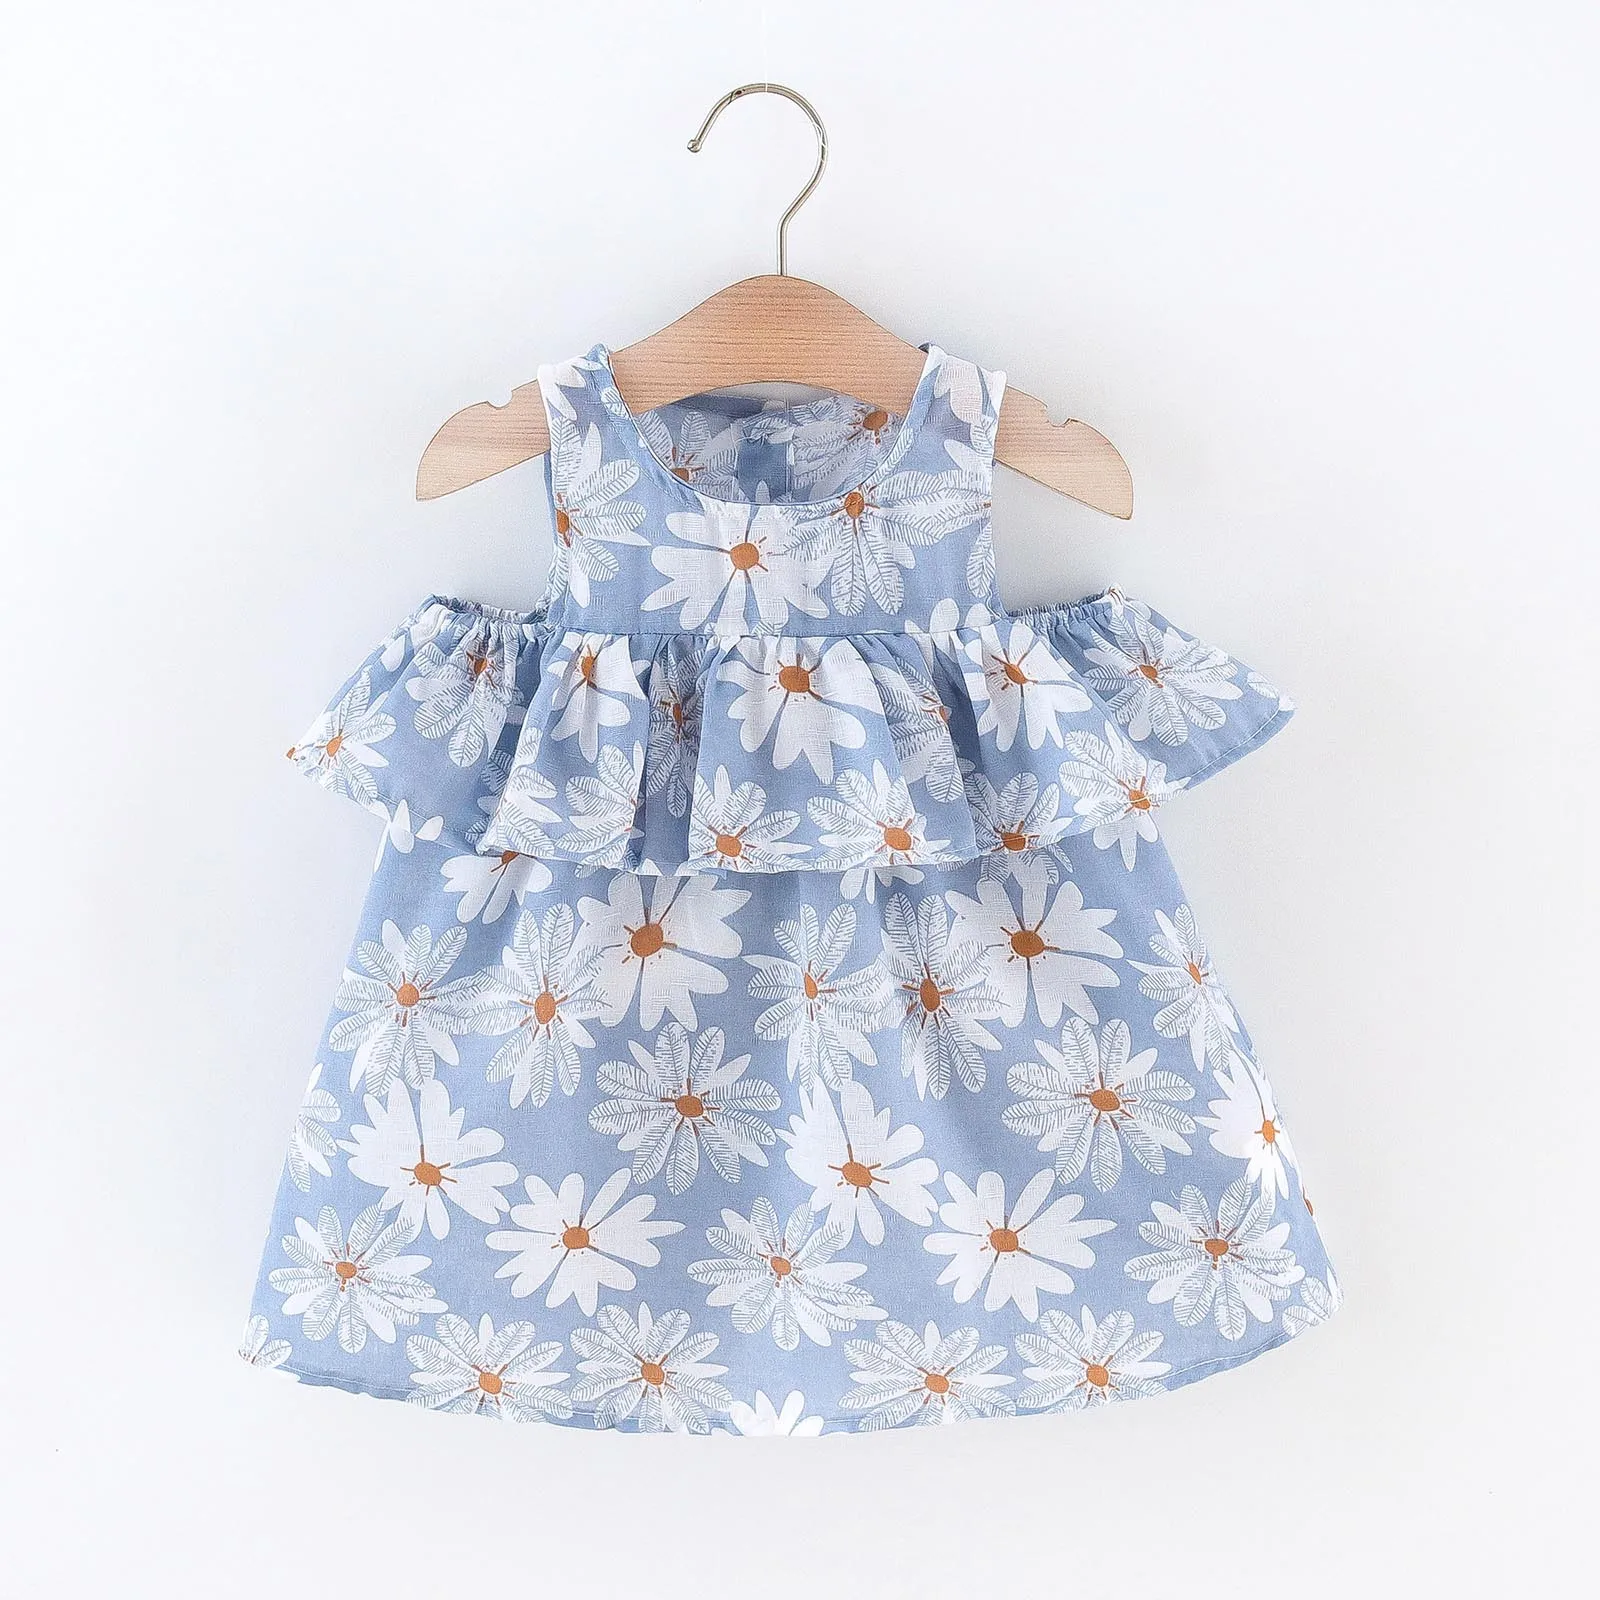 

6M-3Y Toddler Infant Baby Girls Dress 2022 Summer Sleeveless Ruffles Floral Printed Princess Dress Vacation Beach Dress Clothes